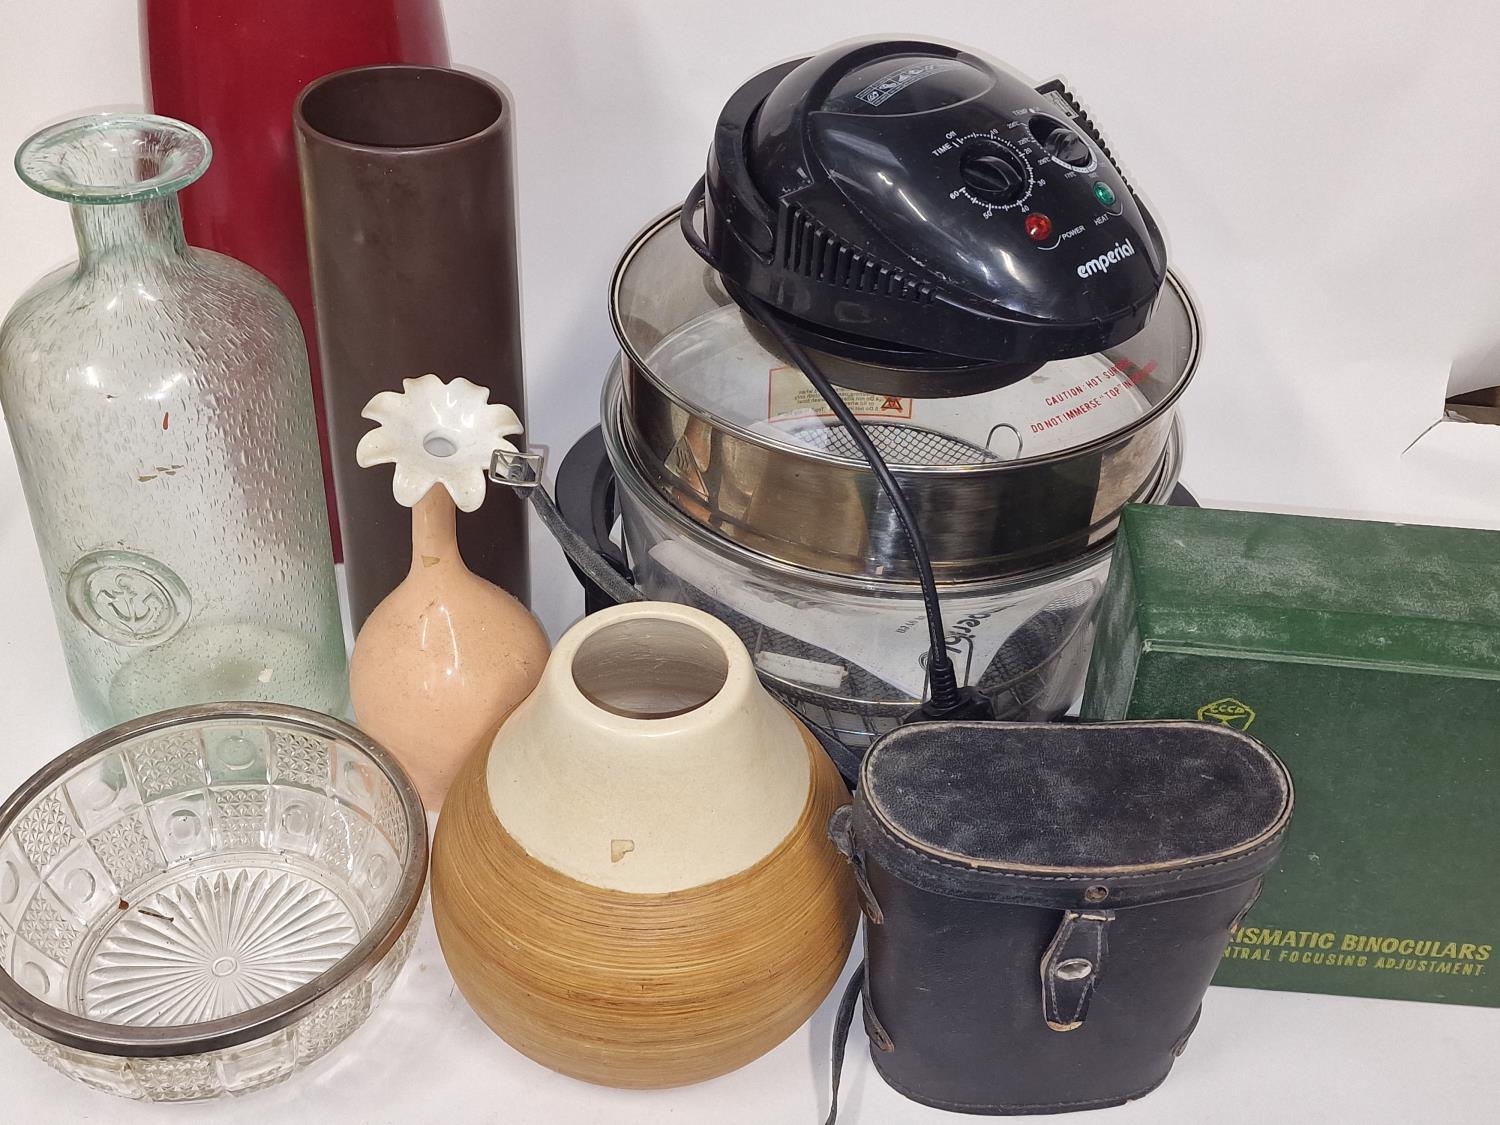 Mixed lot to include halogen cooker, vases, glass bowl, two pairs of binoculars etc. - Image 2 of 2